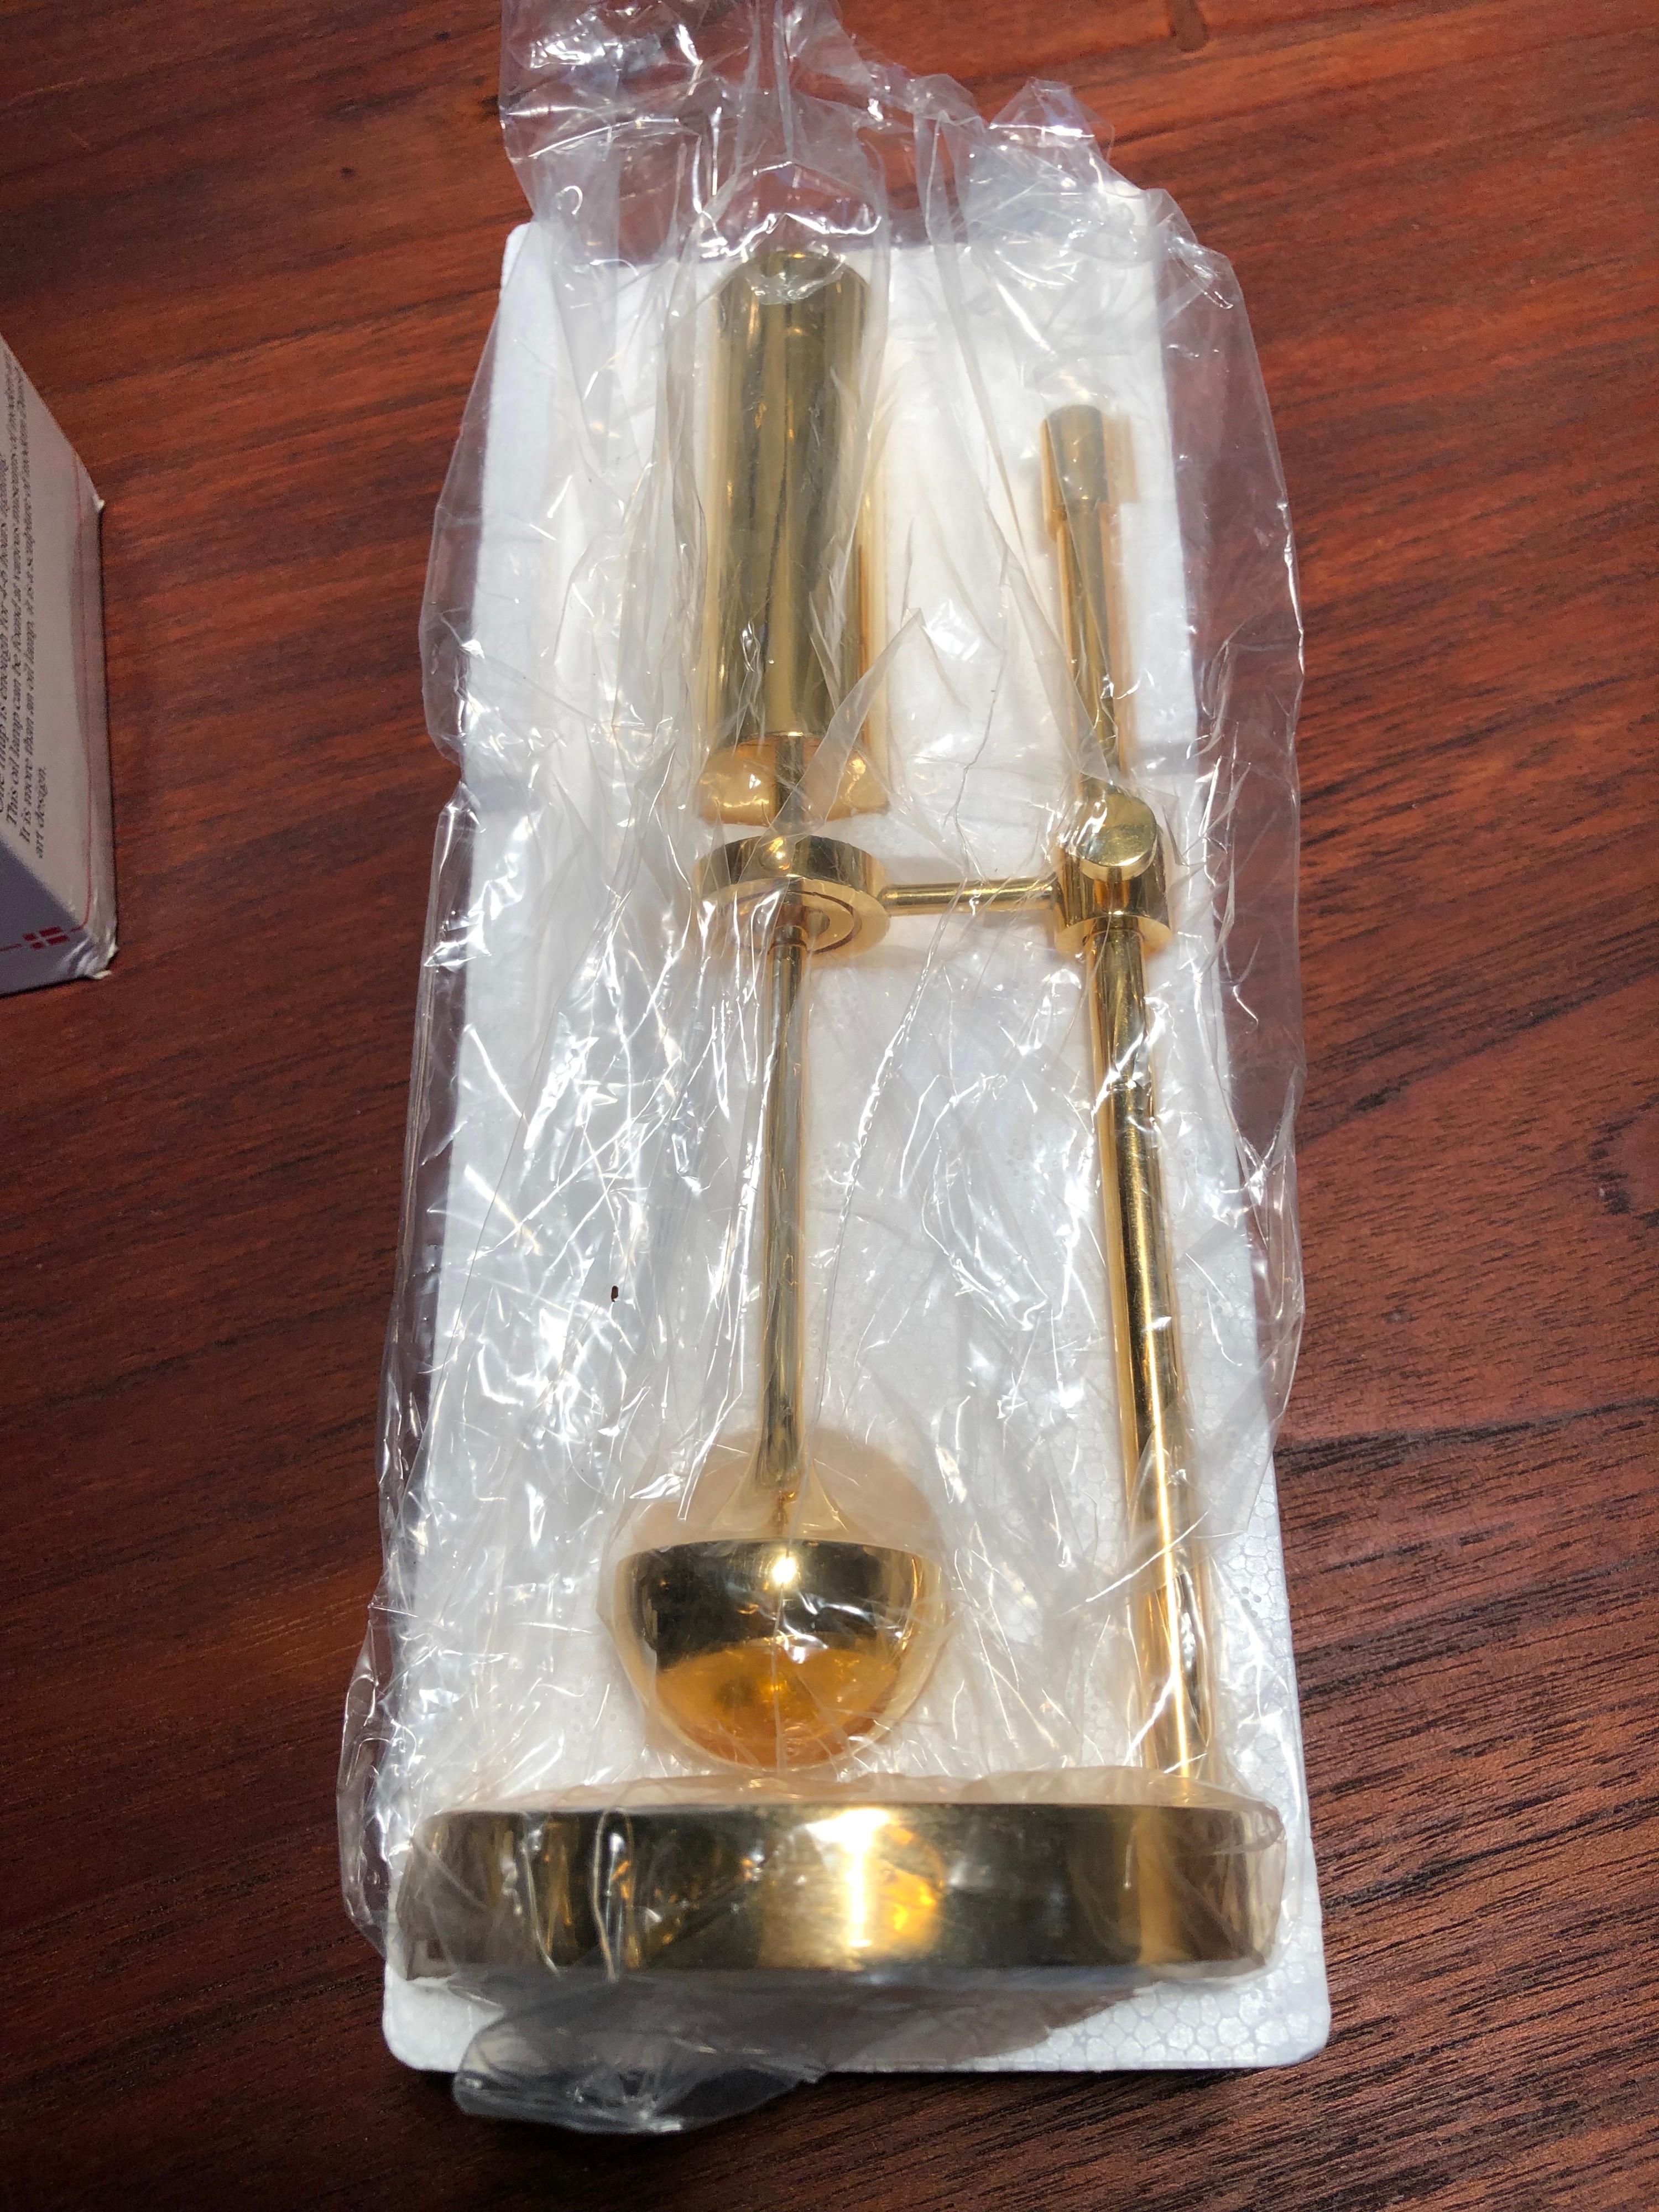 Vintage unused midcentury oil lamp by Ilse Ammonsen for Daproma Denmark
In 24-carat gold plate and in the original box and packing which is rare.
An extra wick will be included.
Runs on normal lamp oil. 



  